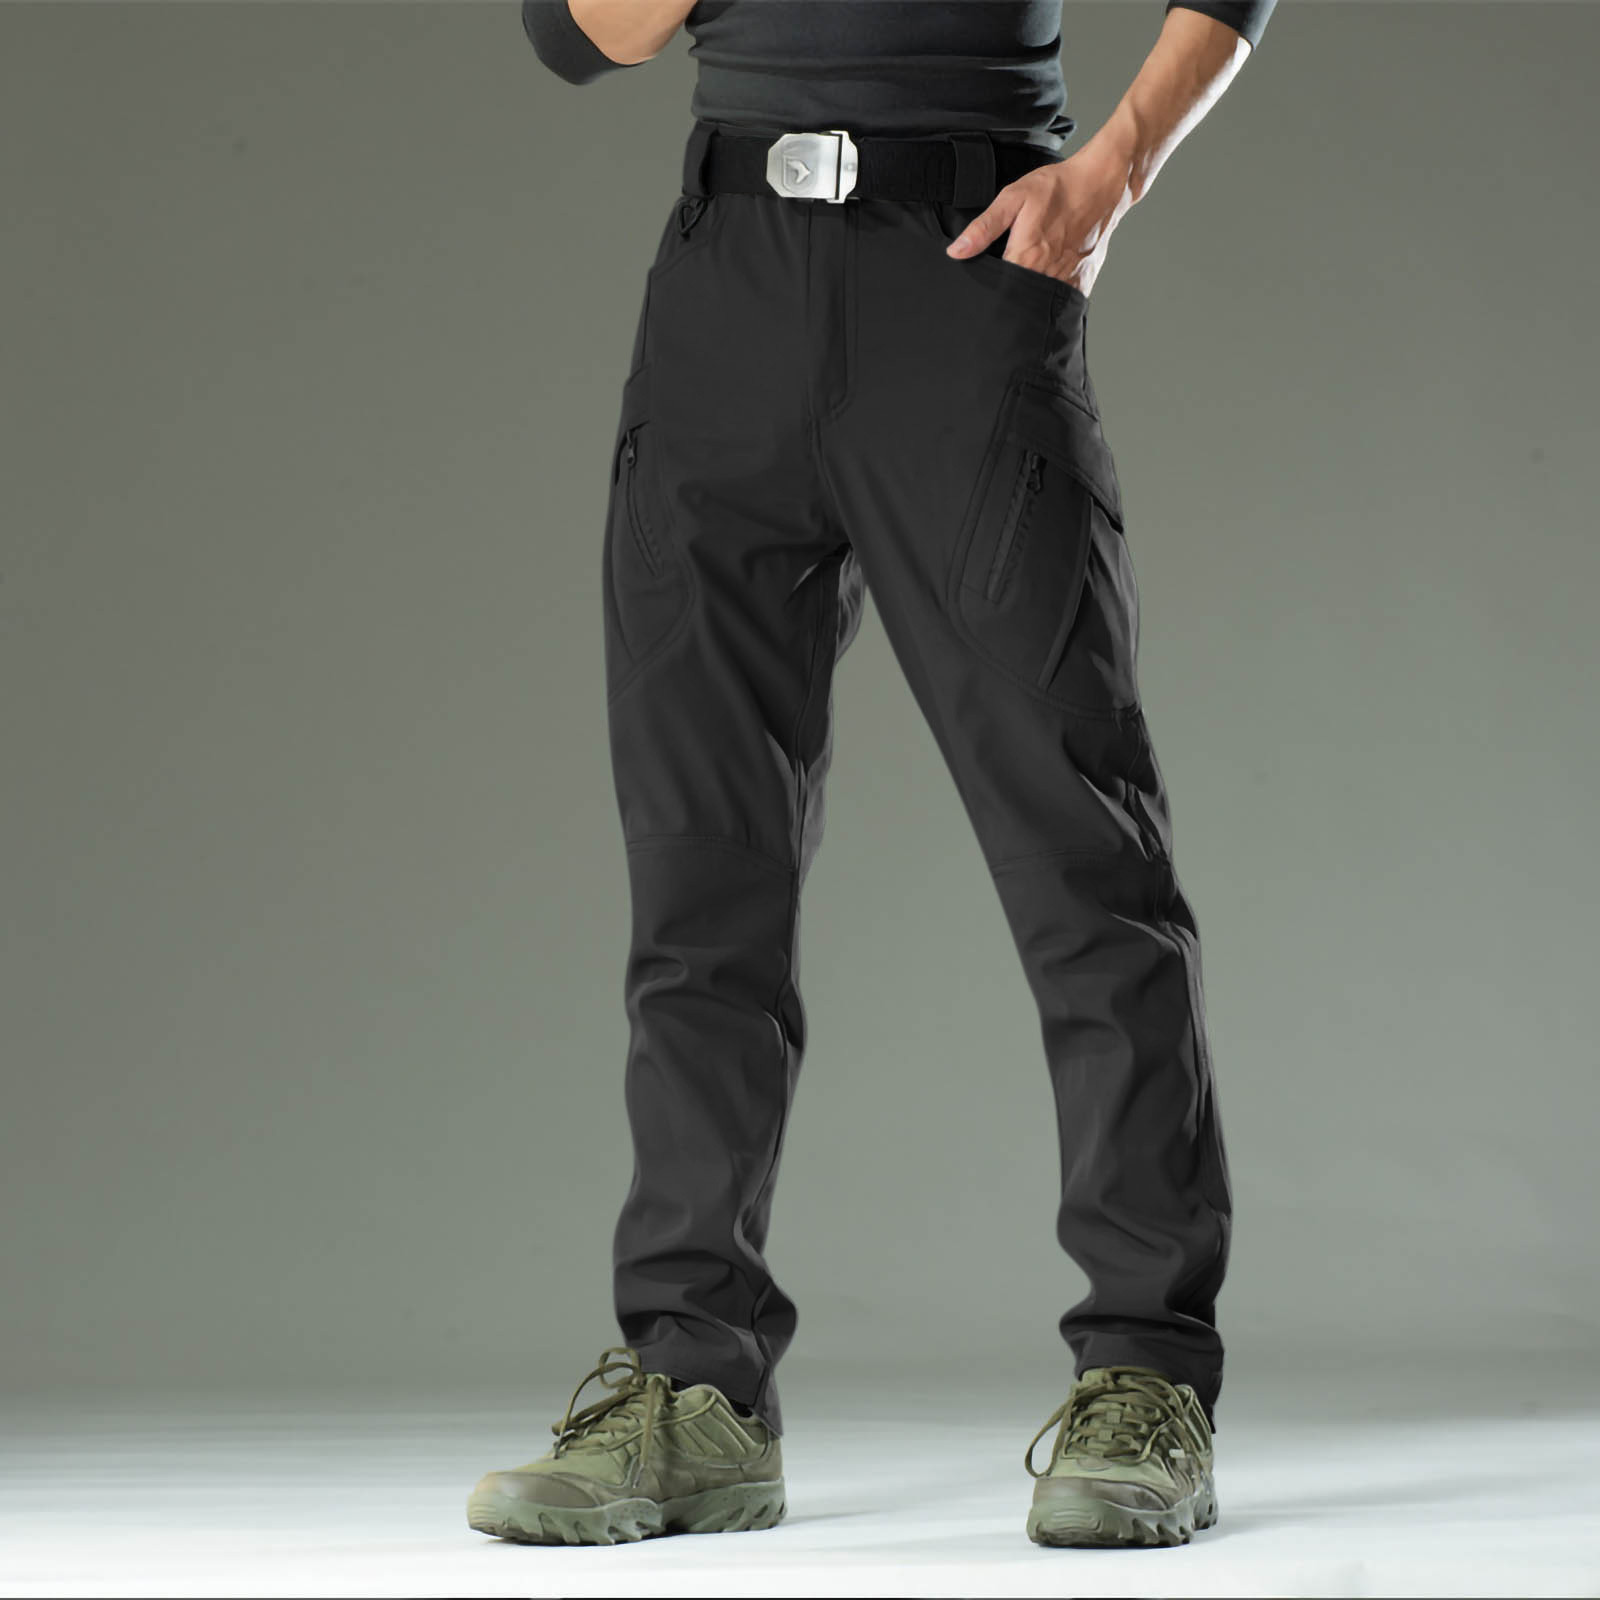 WAENQINLA Cargo Pants for Men Relaxed Fit Athletic Pants Outdoor ...